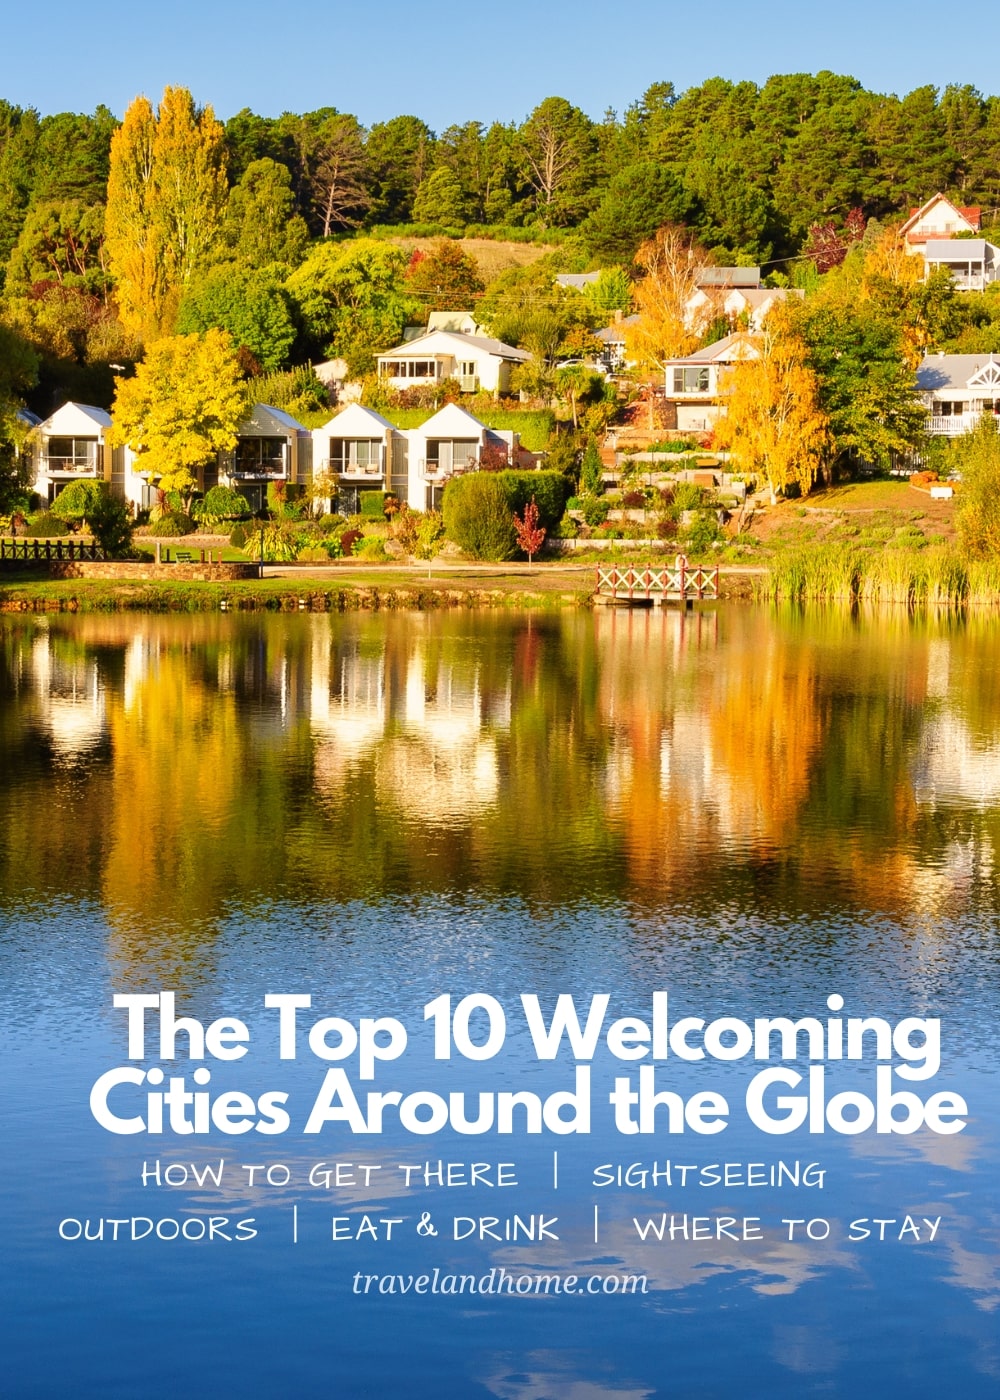 The Top Welcoming Cities Around the Globe, sightseeing, where to stay, local cuisine, landmarks, activities, travel guide min